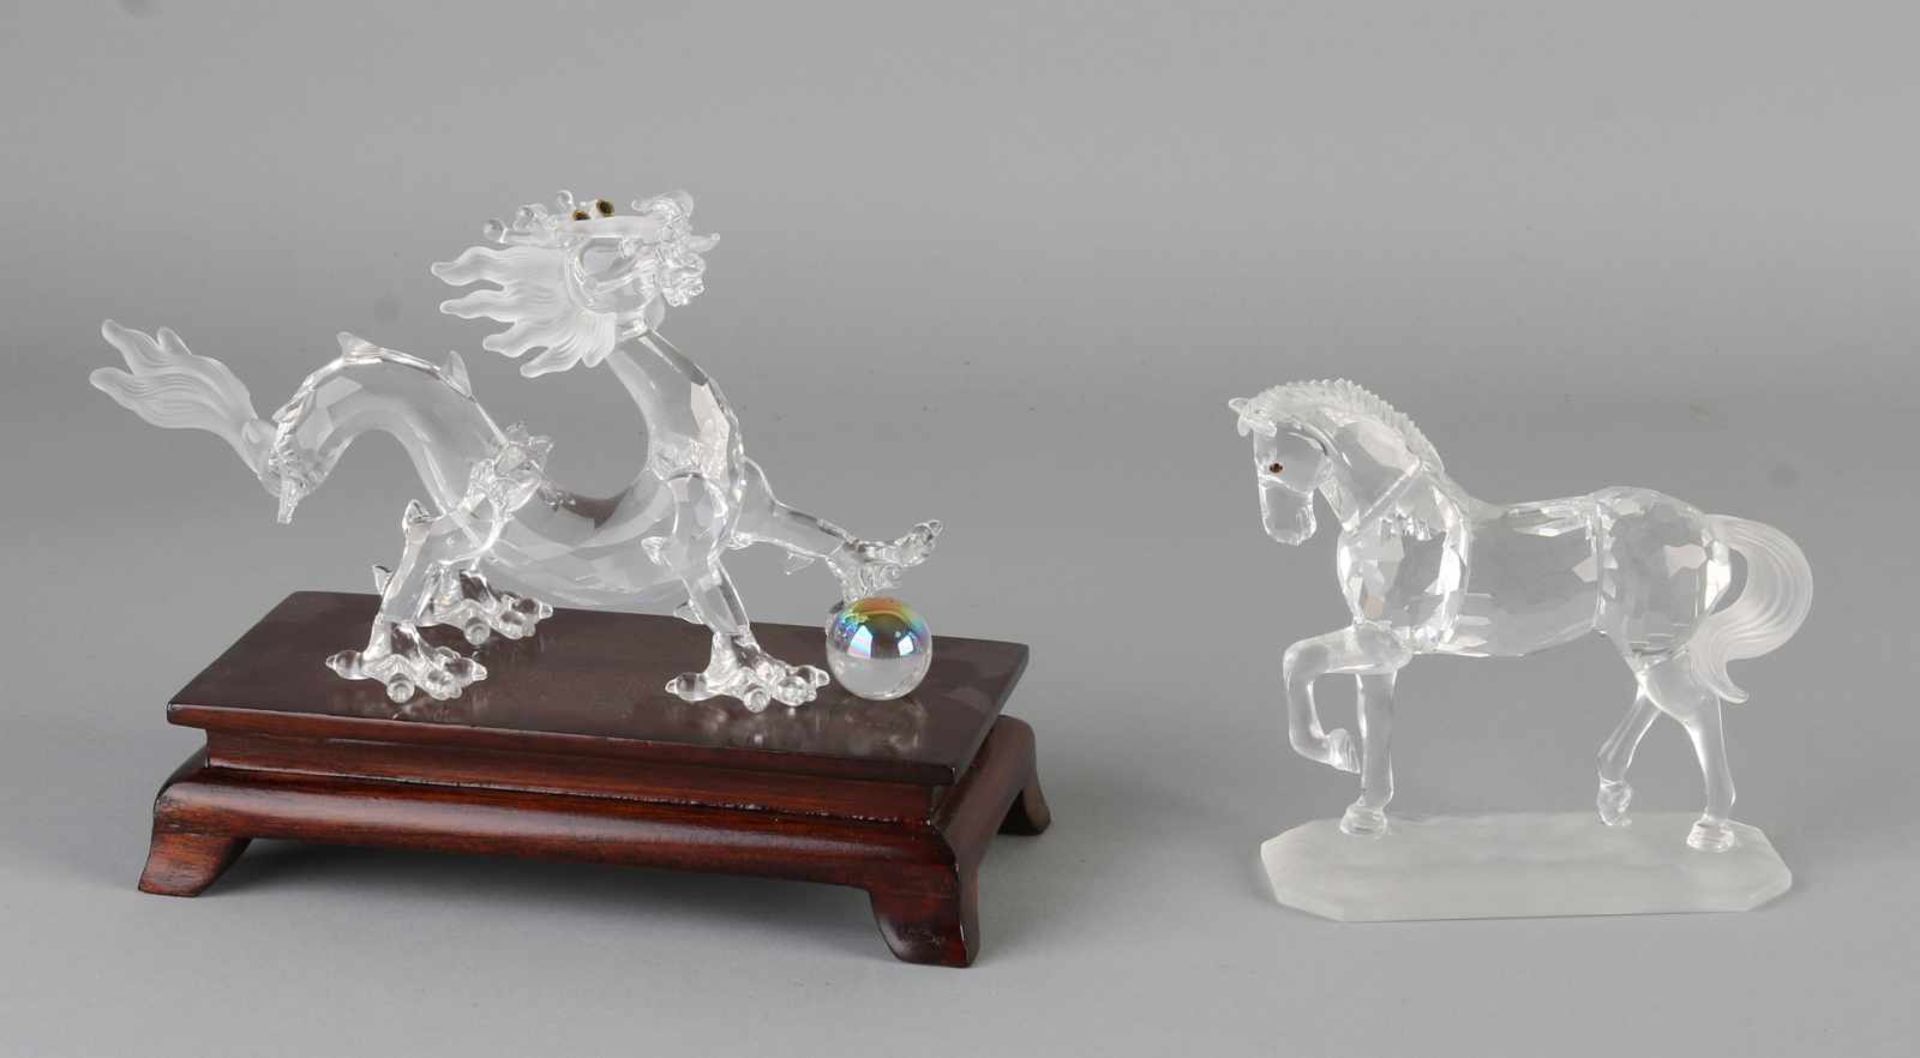 Two parts Swarovski in good condition with original boxes: 1x dragon with display (238202 Crystal